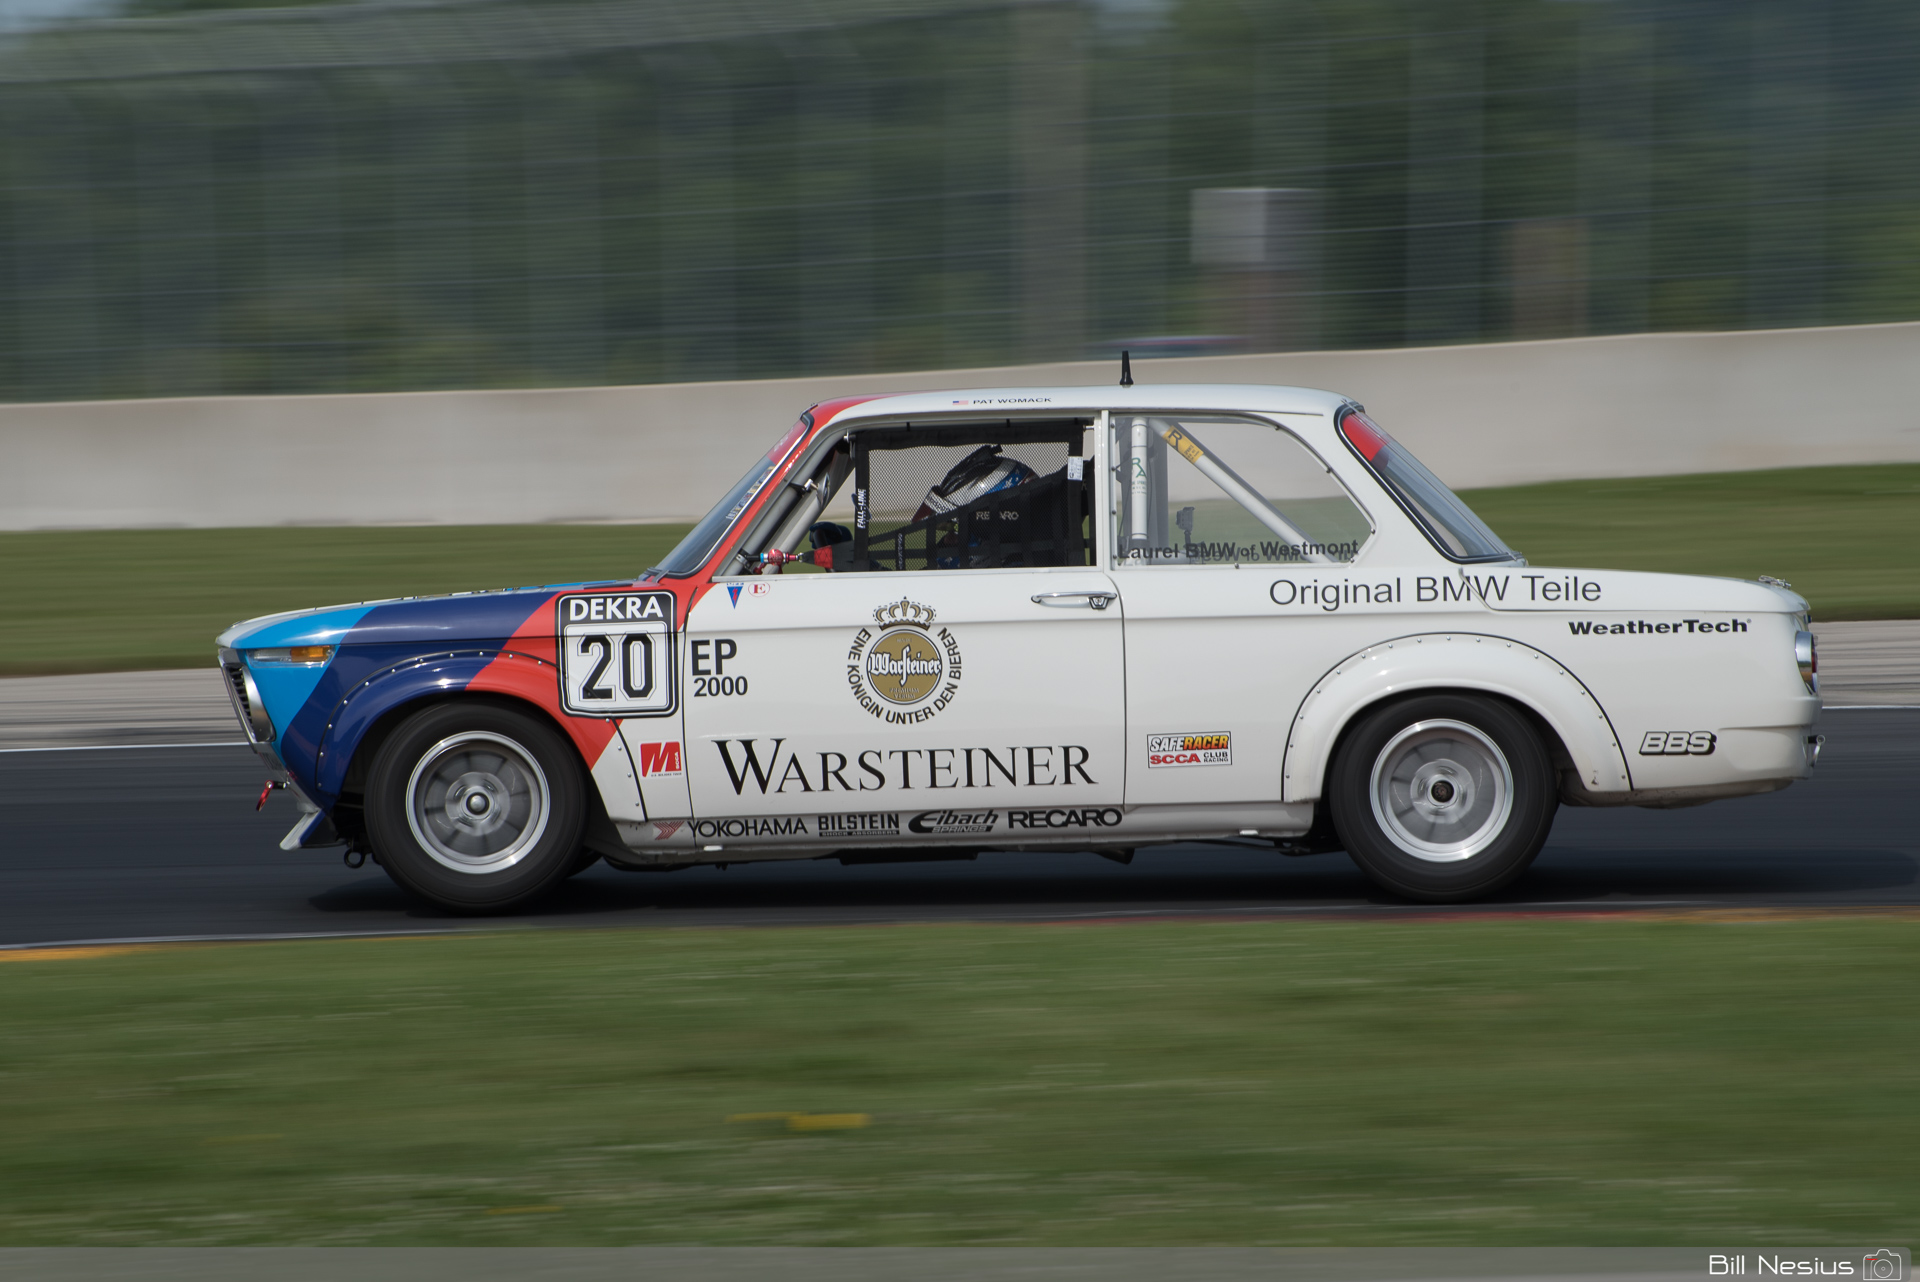 1973 BMW 2002 #20 in turn 8 driven by Patrick Womack / DSC_3830 / 4